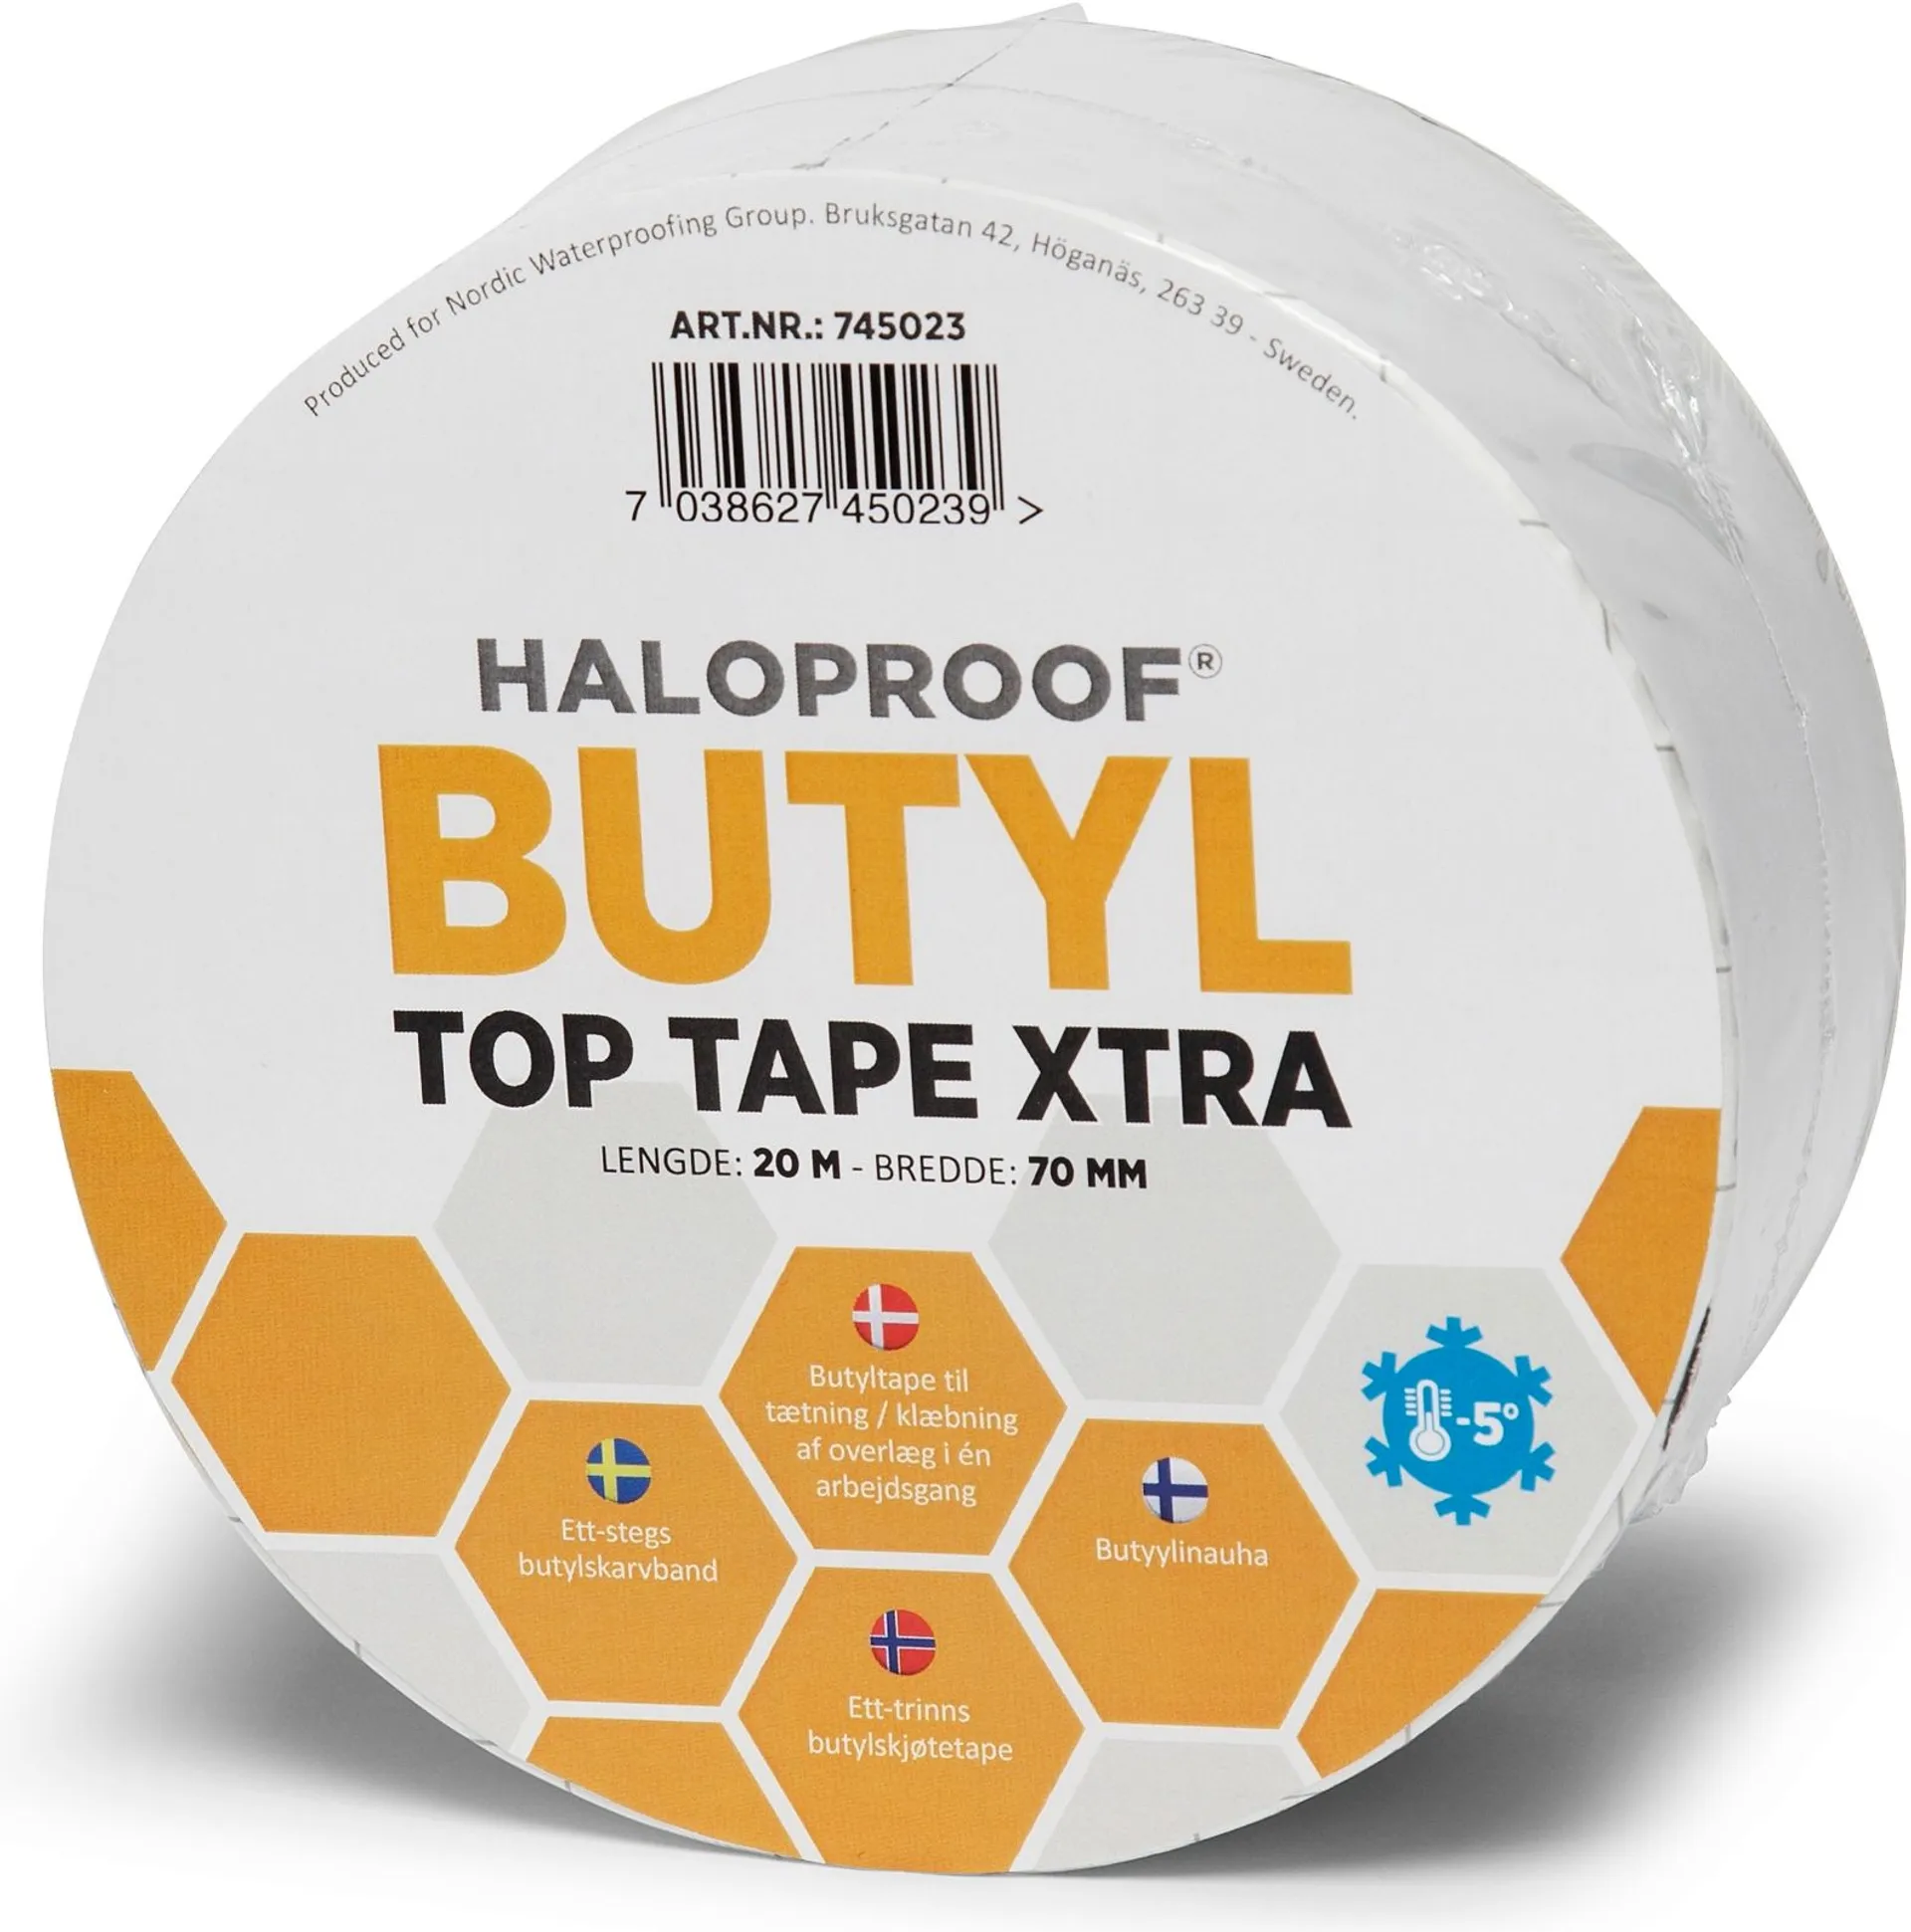 Haloproof teippi Top Tape Xtra 70 mm x 20 m